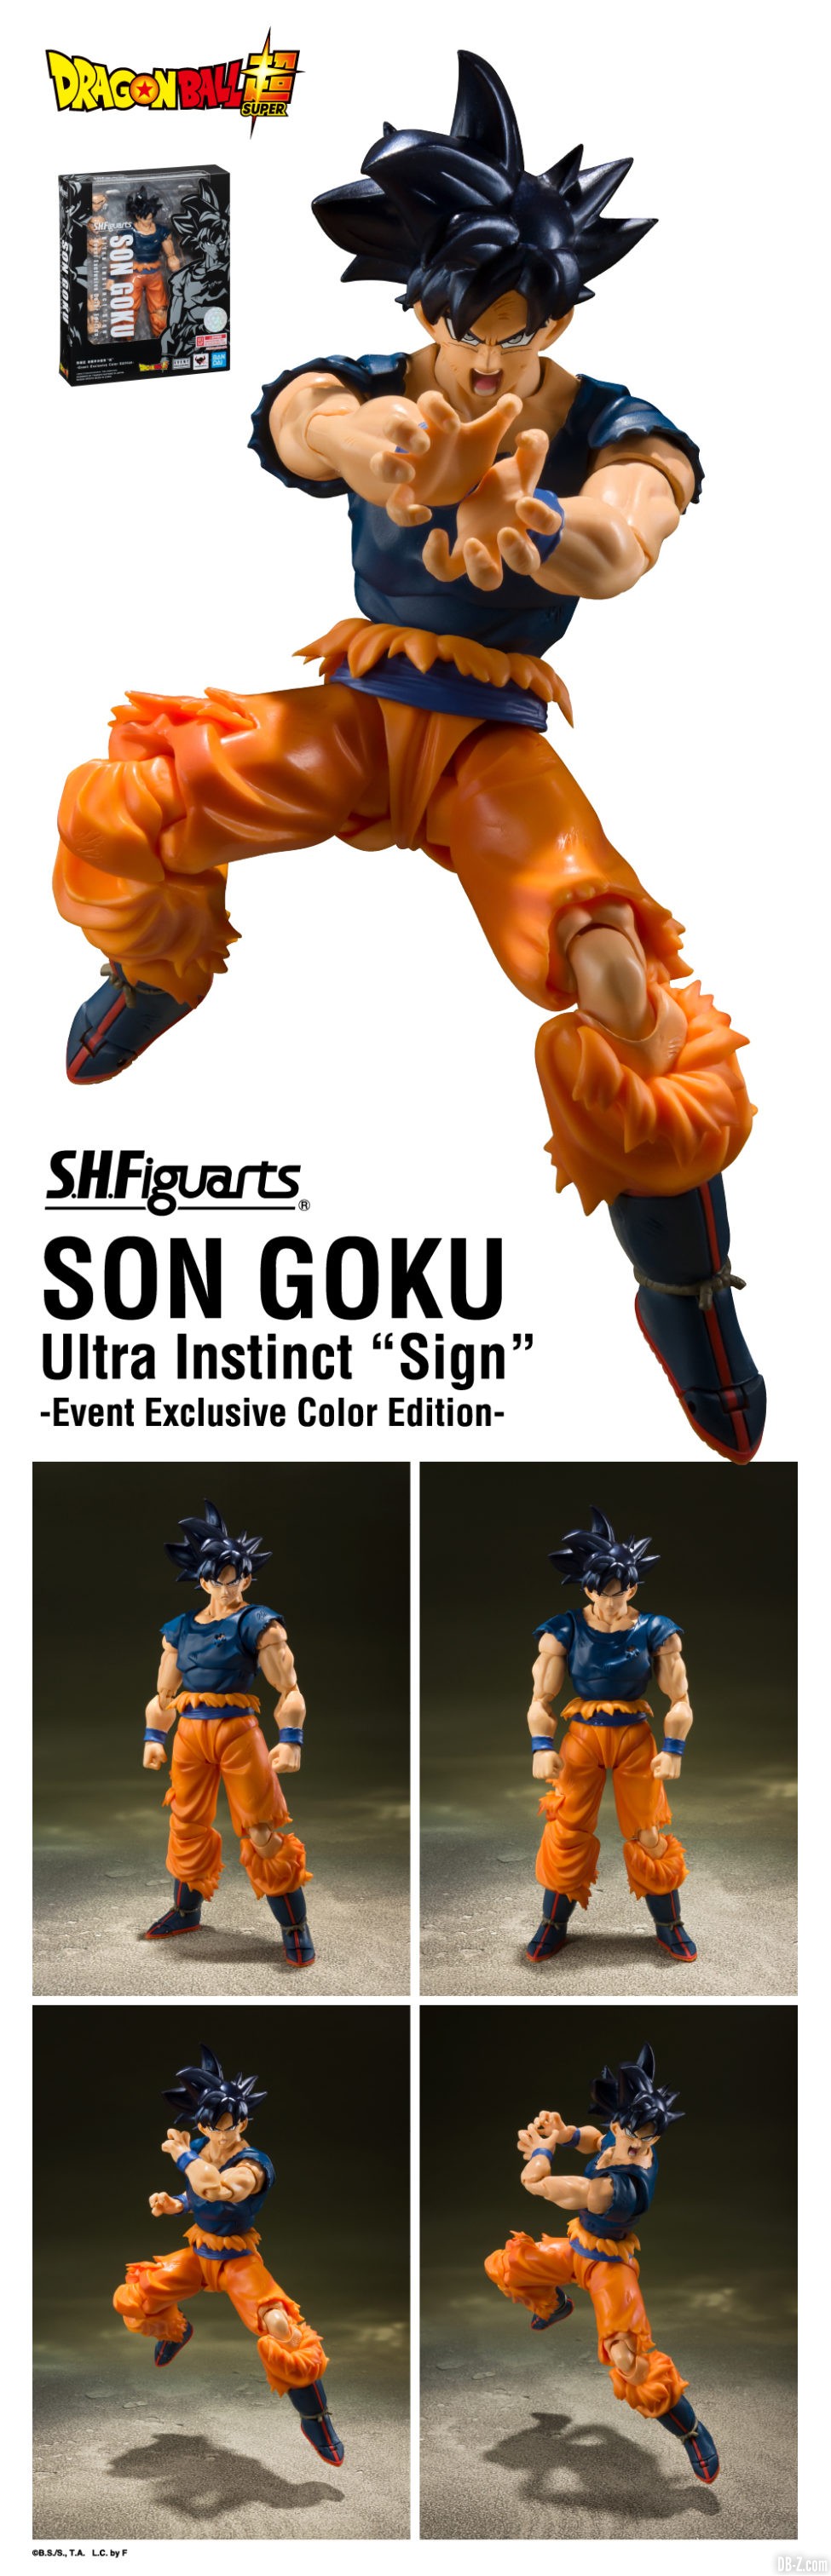 S.H.Figuarts SON GOKU Ultra Instinct Sign Event Exclusive Color Edition Image 7